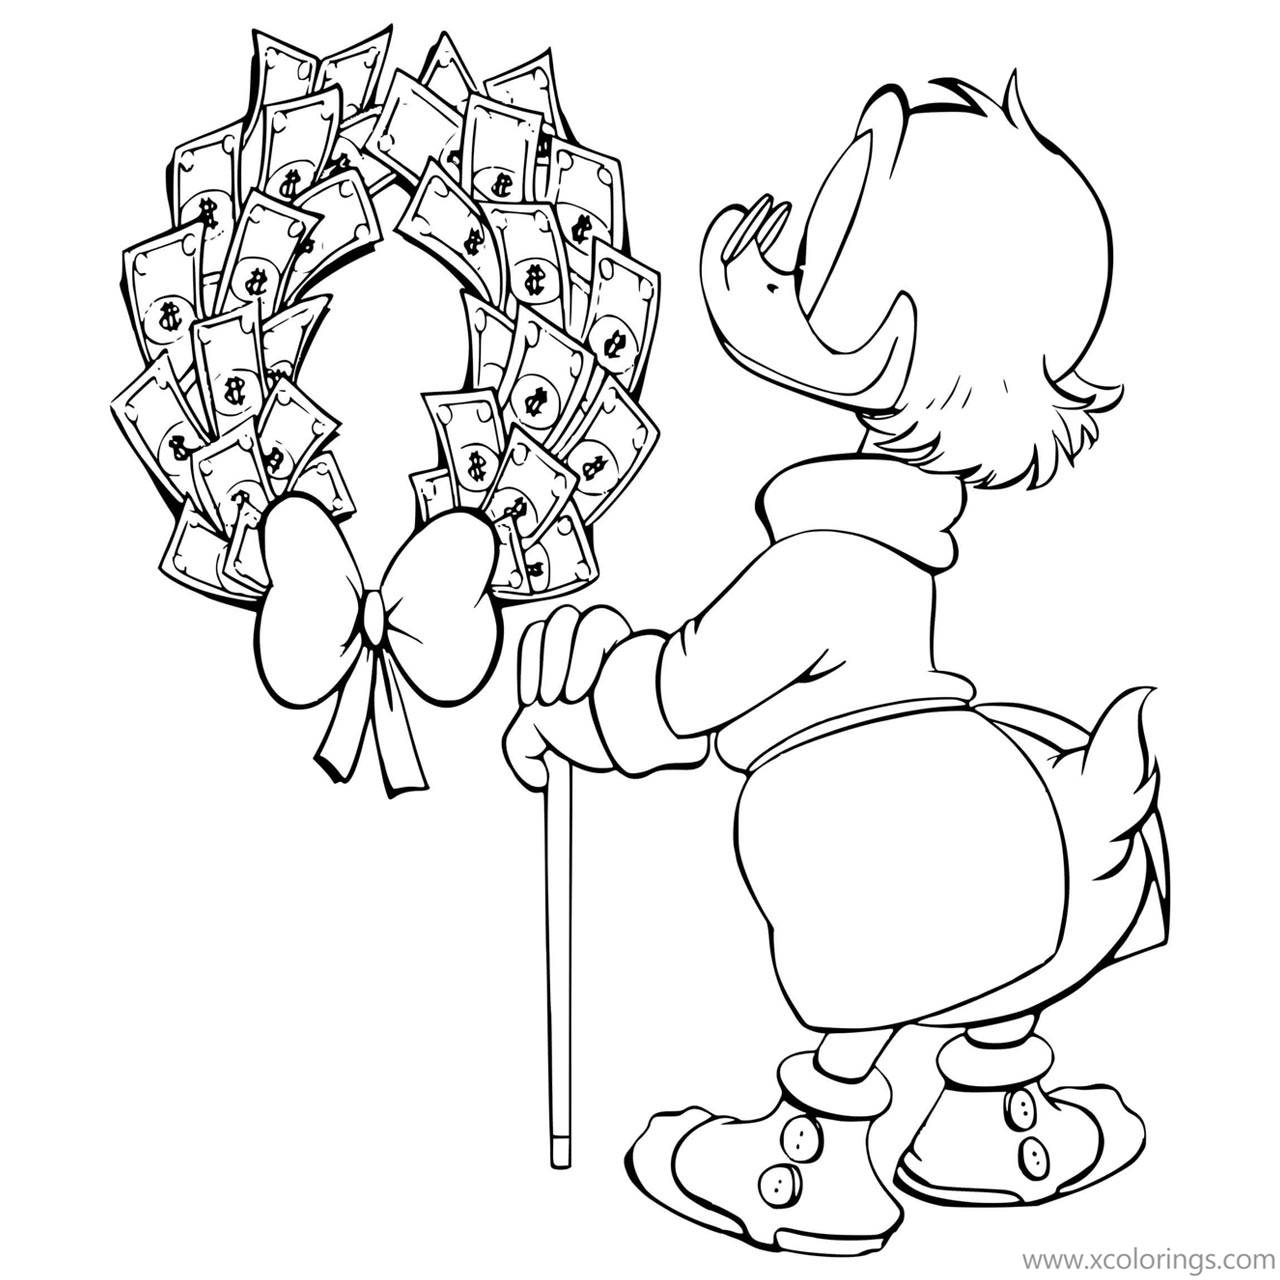 Free Mickey Mouse Christmas Coloring Pages Scrooge Money Wreath printable